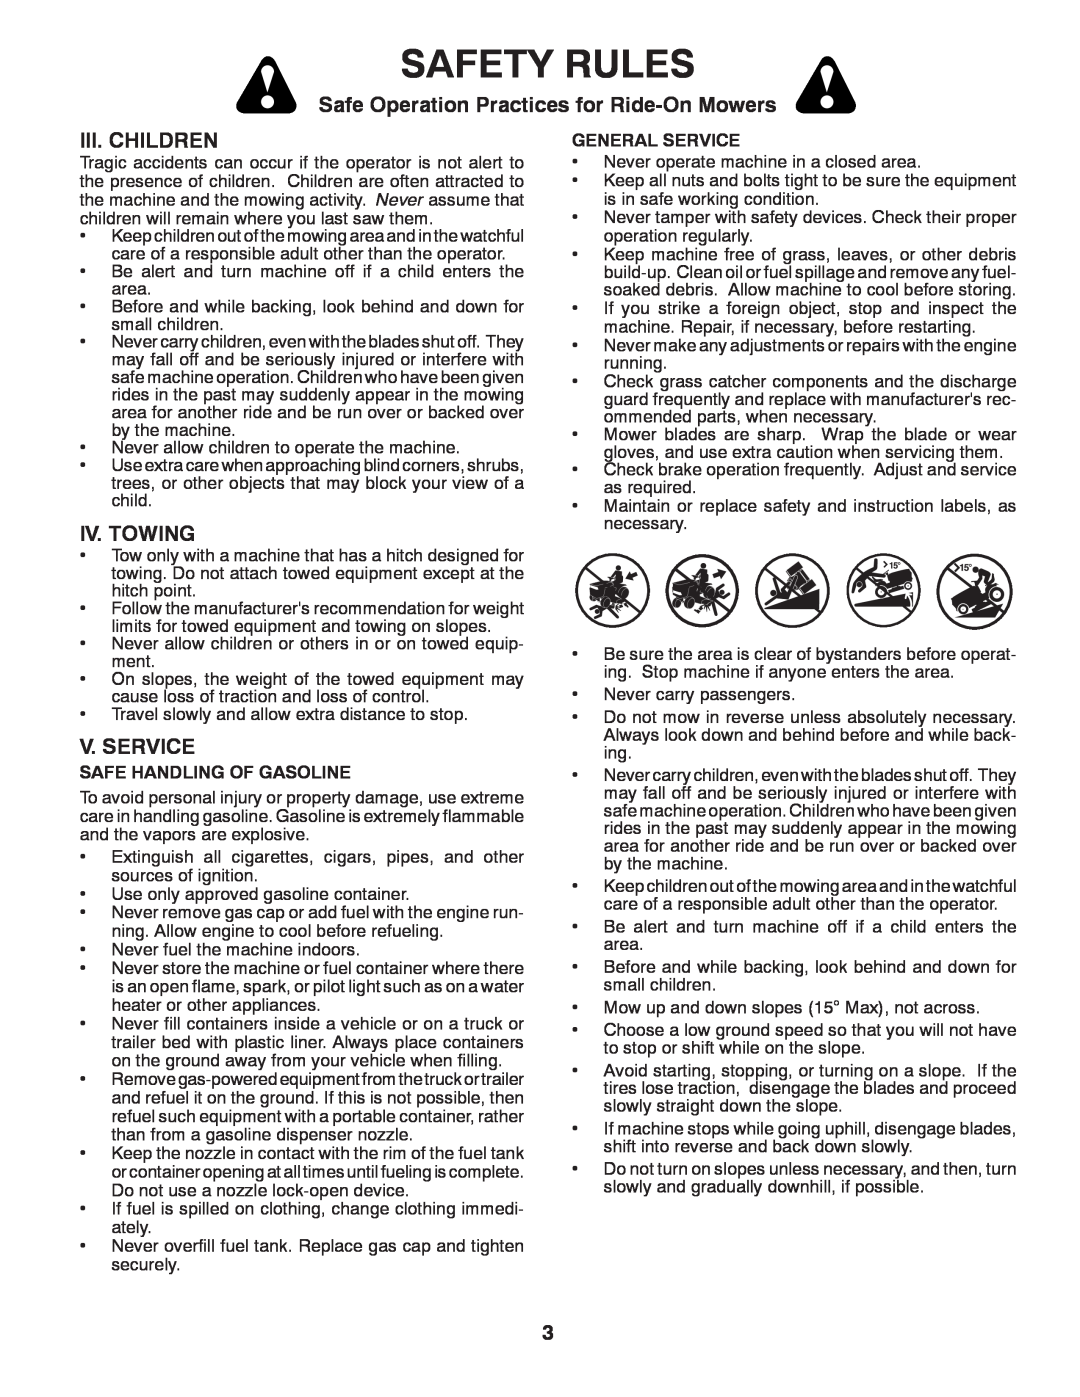 Poulan PB20H42LT manual Iii. Children, Iv. Towing, V. Service, Safety Rules, Safe Operation Practices for Ride-On Mowers 